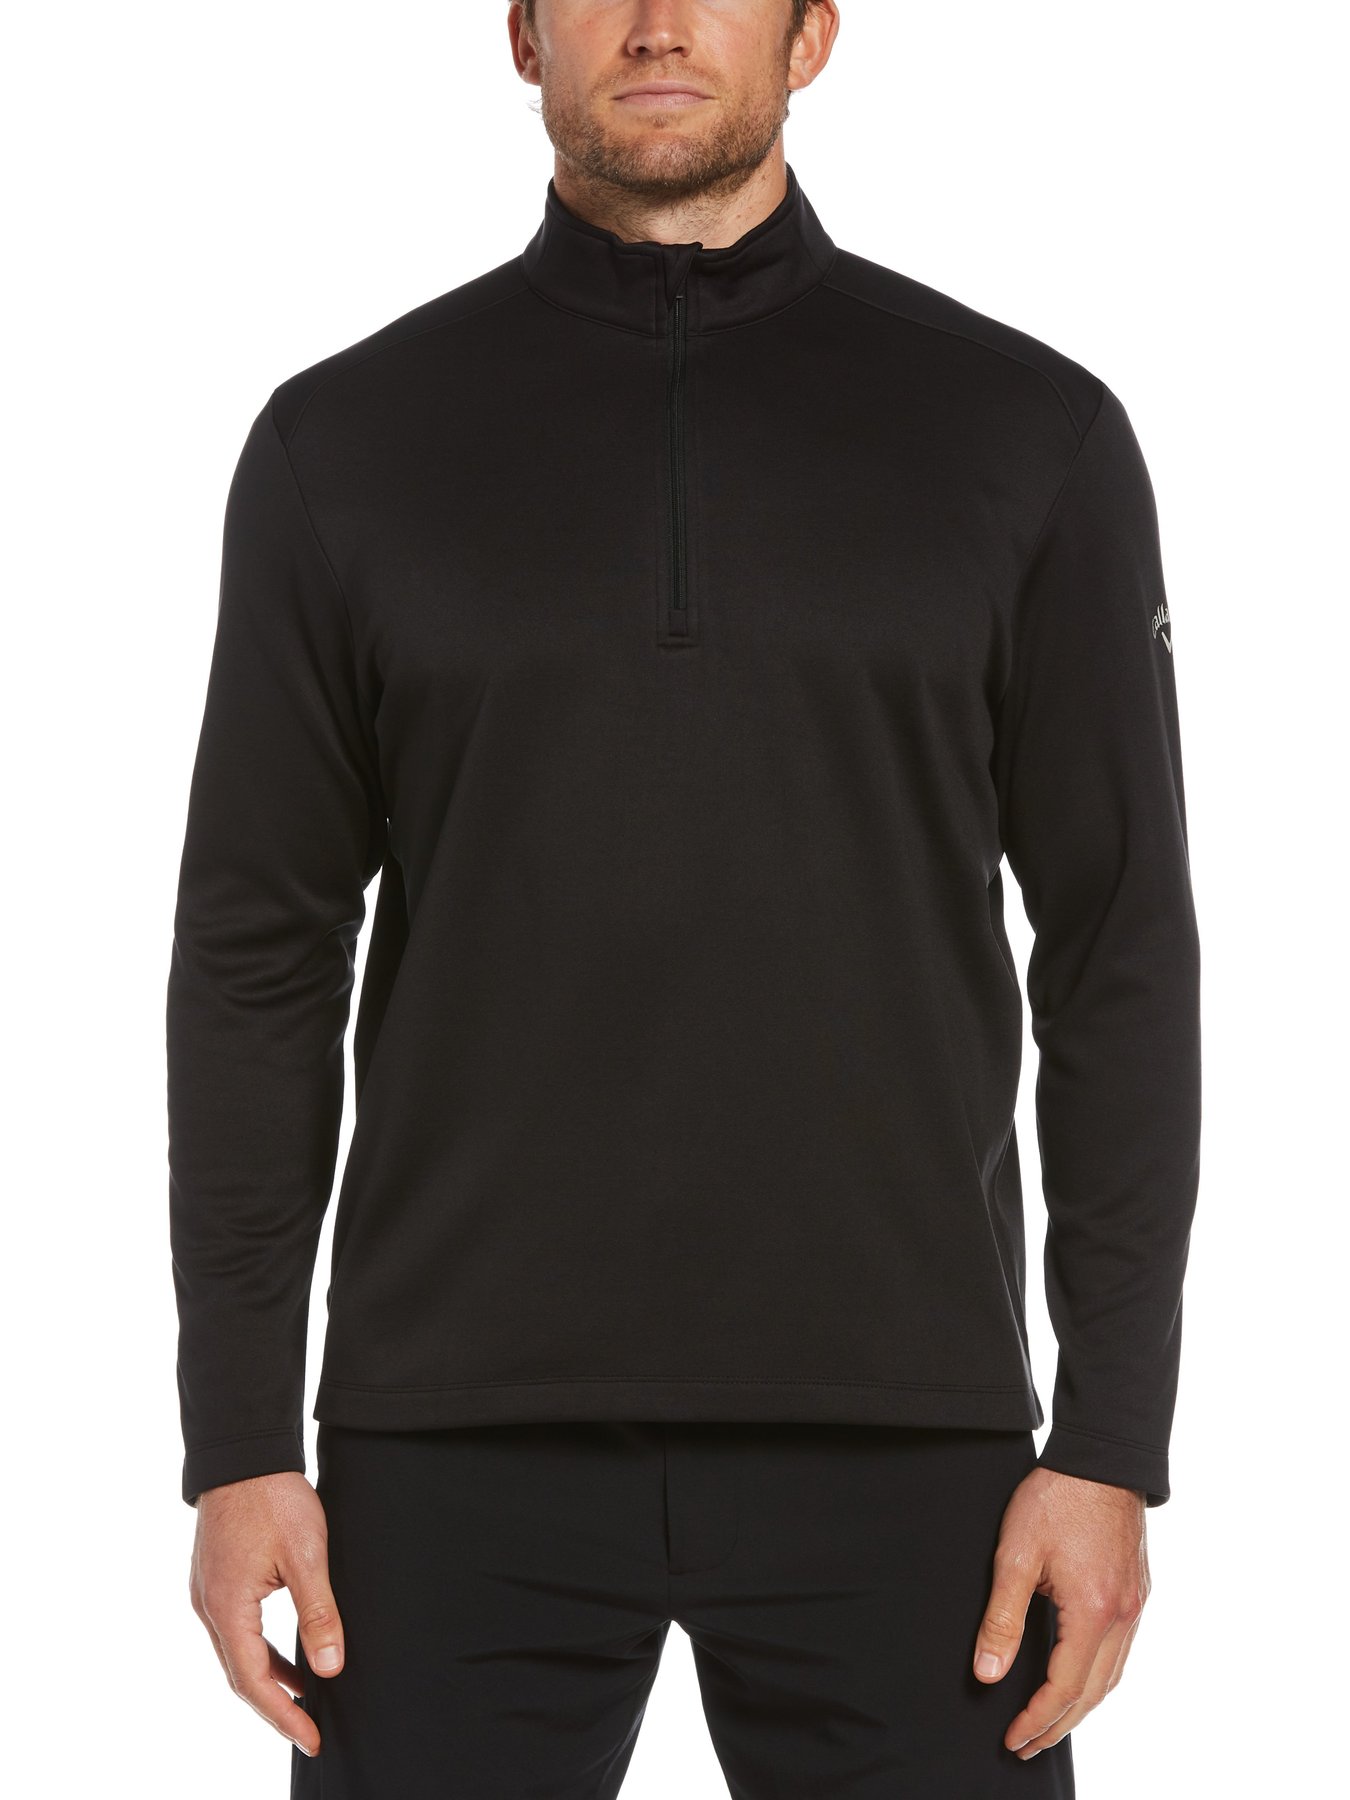 Golf Apparel Shop Black Friday Sale Up to 60% Off + Extra 20% Off $9.99+